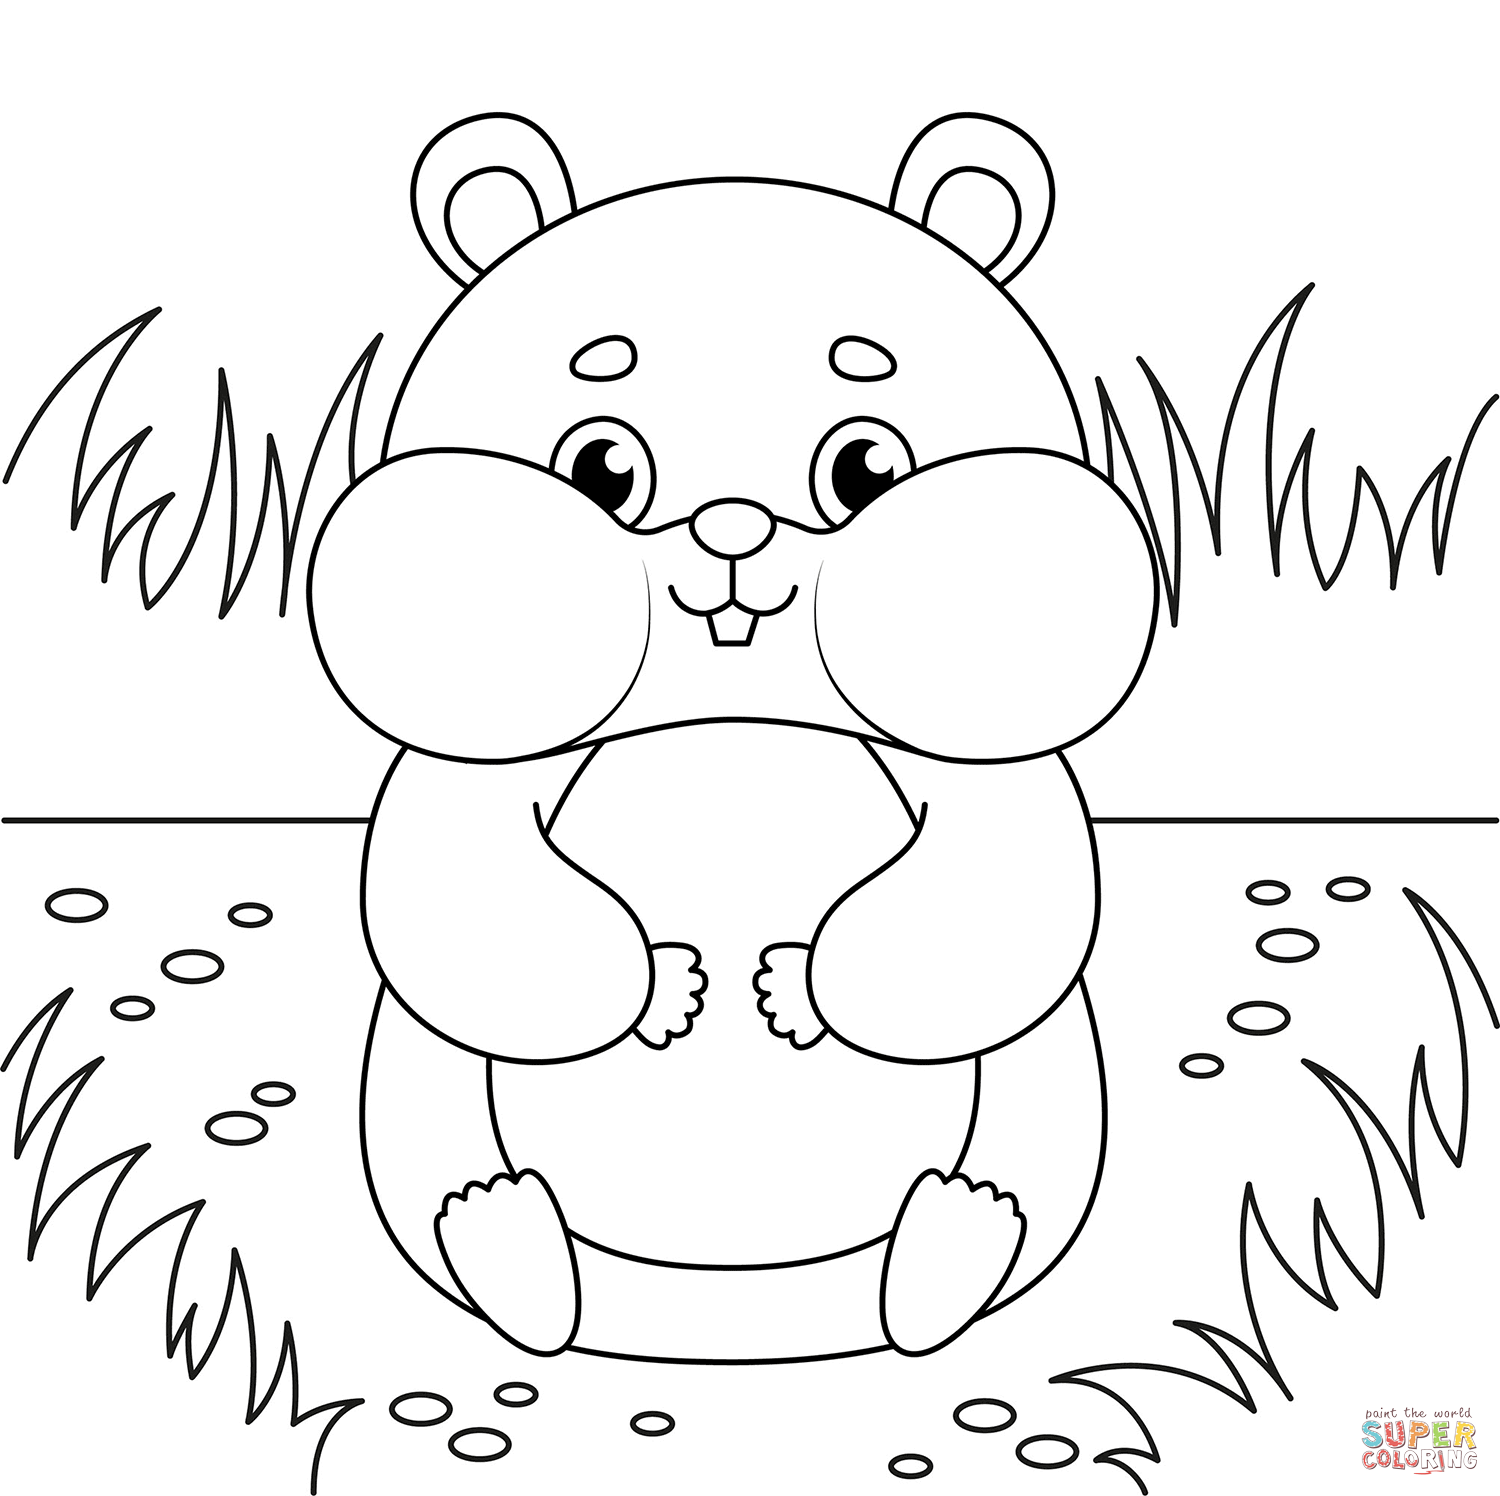 Cute Hamster coloring page | Free Printable Coloring Pages